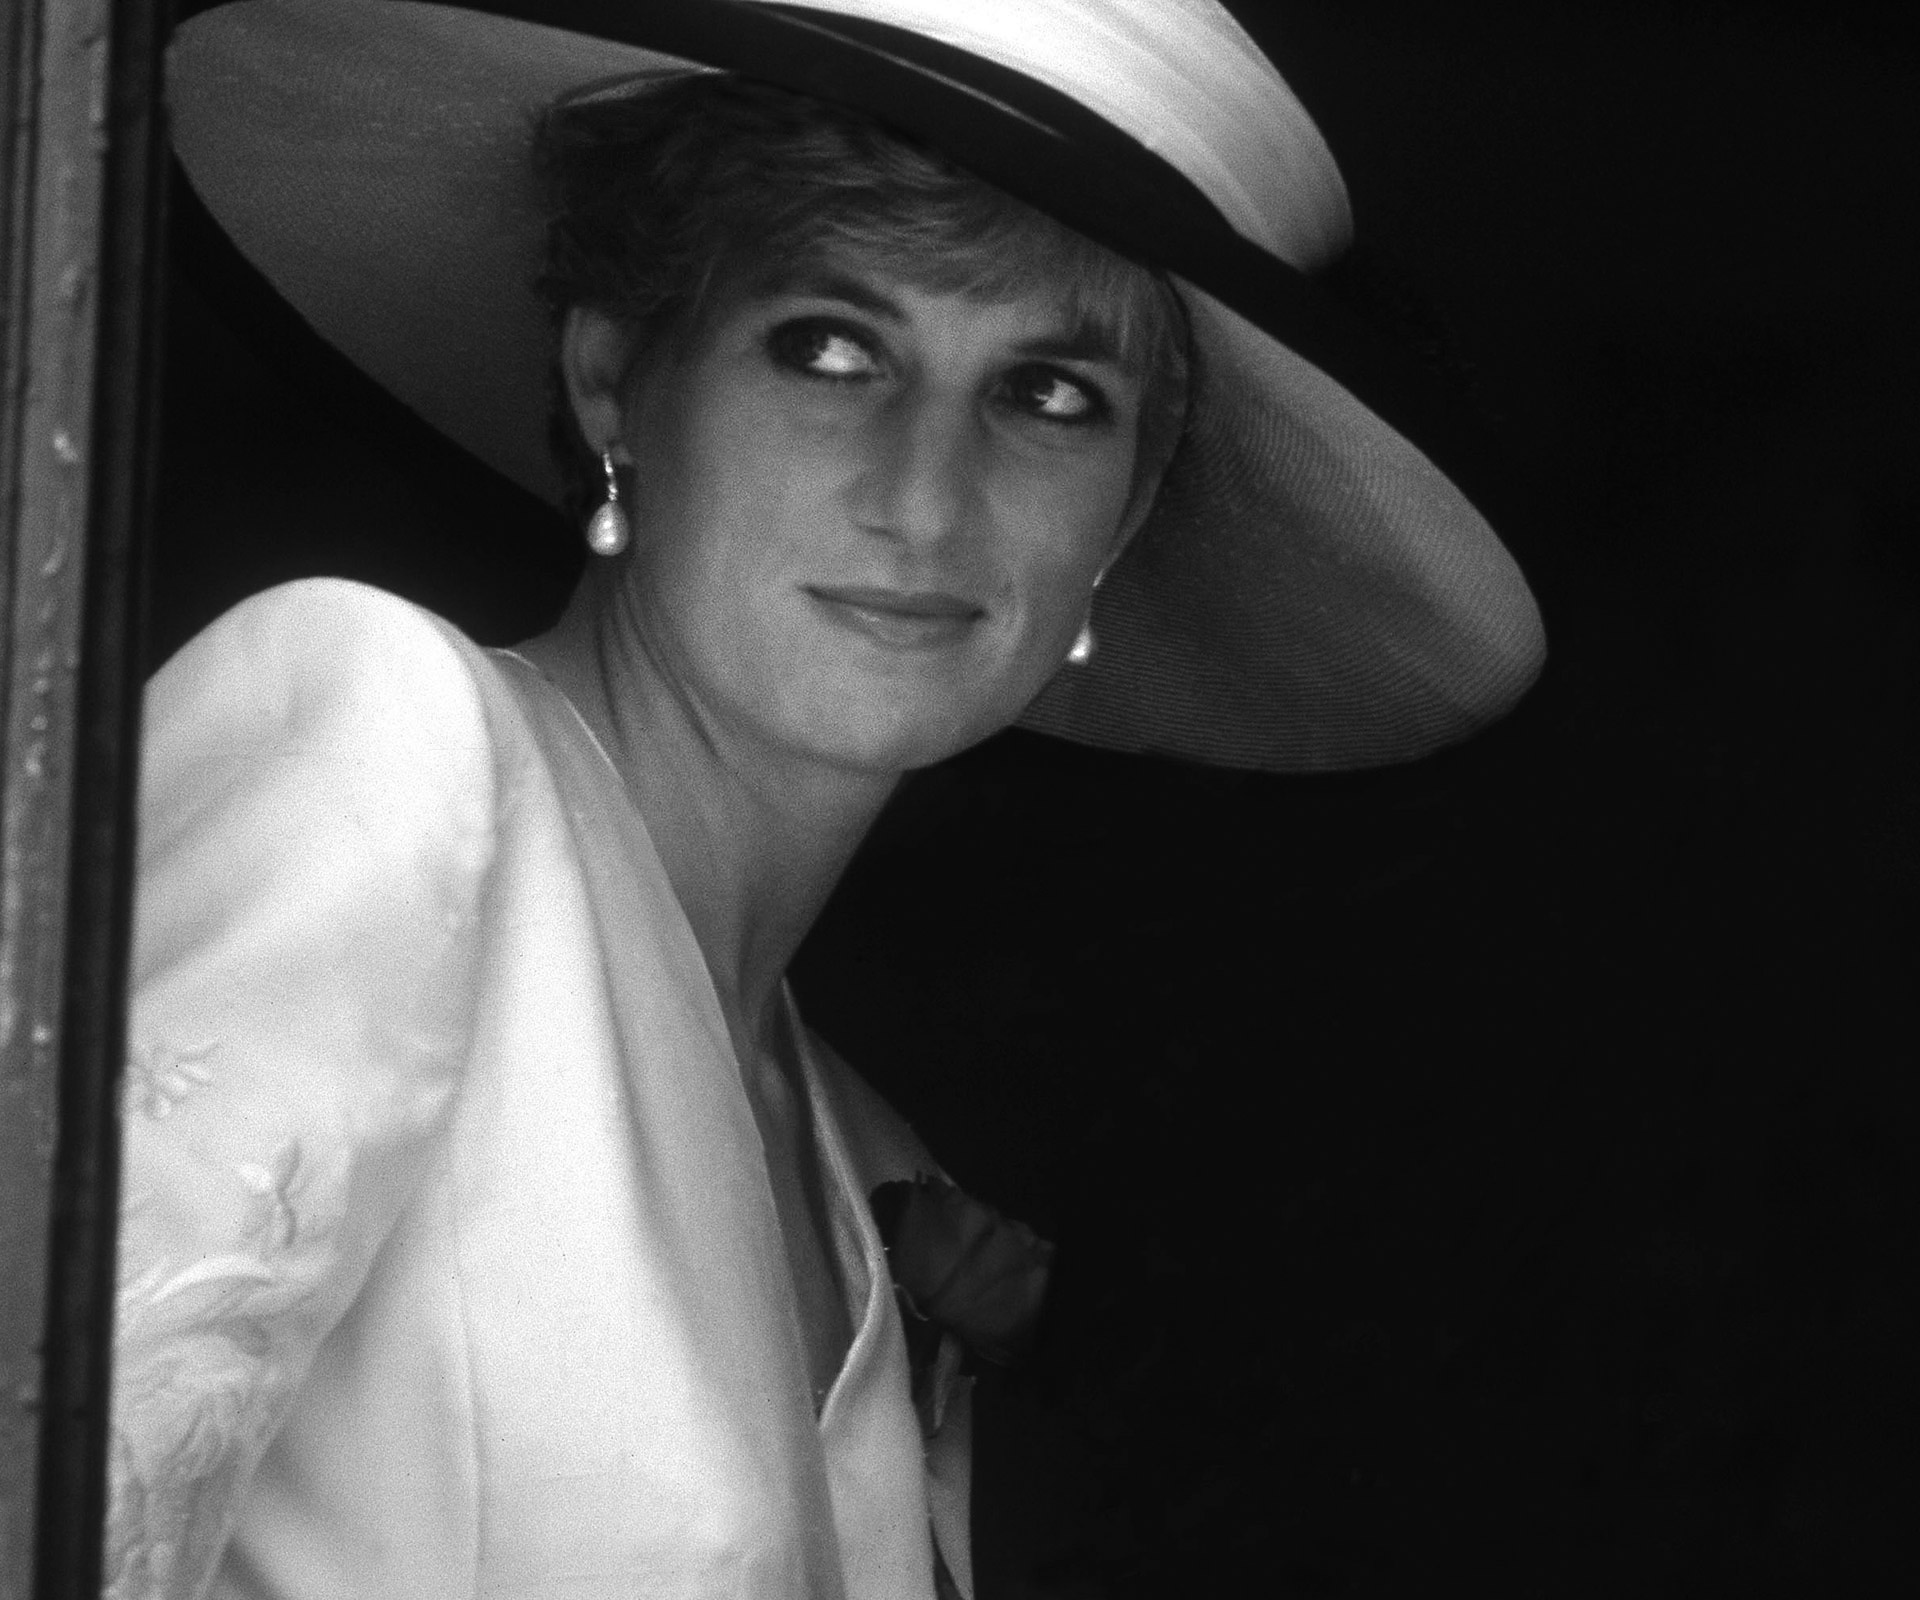 The Australian Women’s Weekly pays tribute to Princess Diana